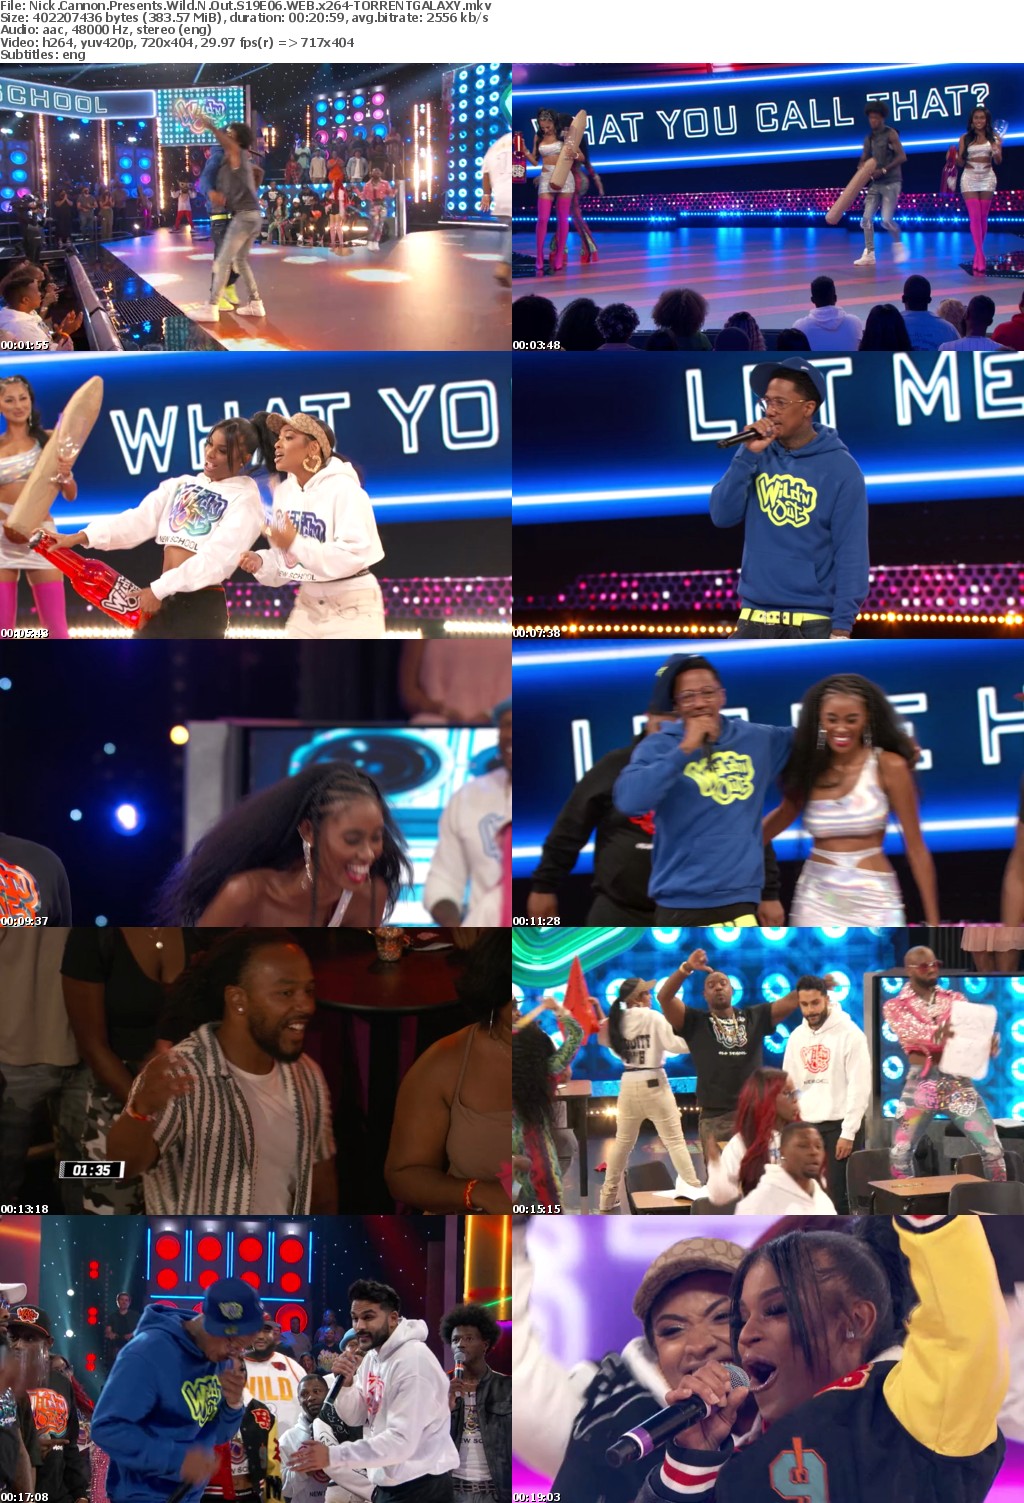 Nick Cannon Presents Wild N Out S19E06 WEB x264-GALAXY